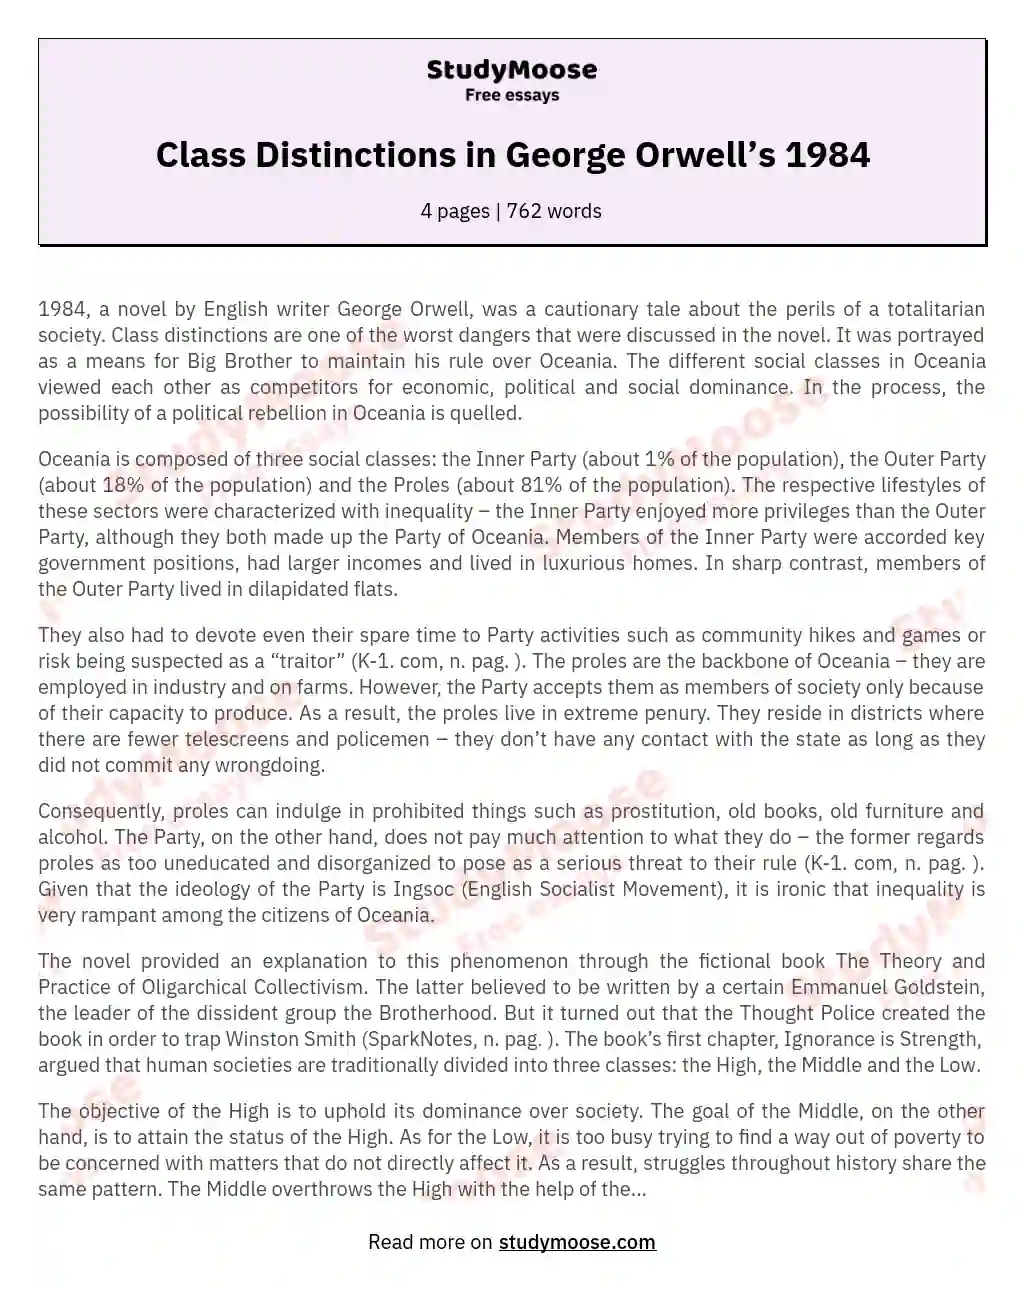 Class Distinctions in George Orwell’s 1984